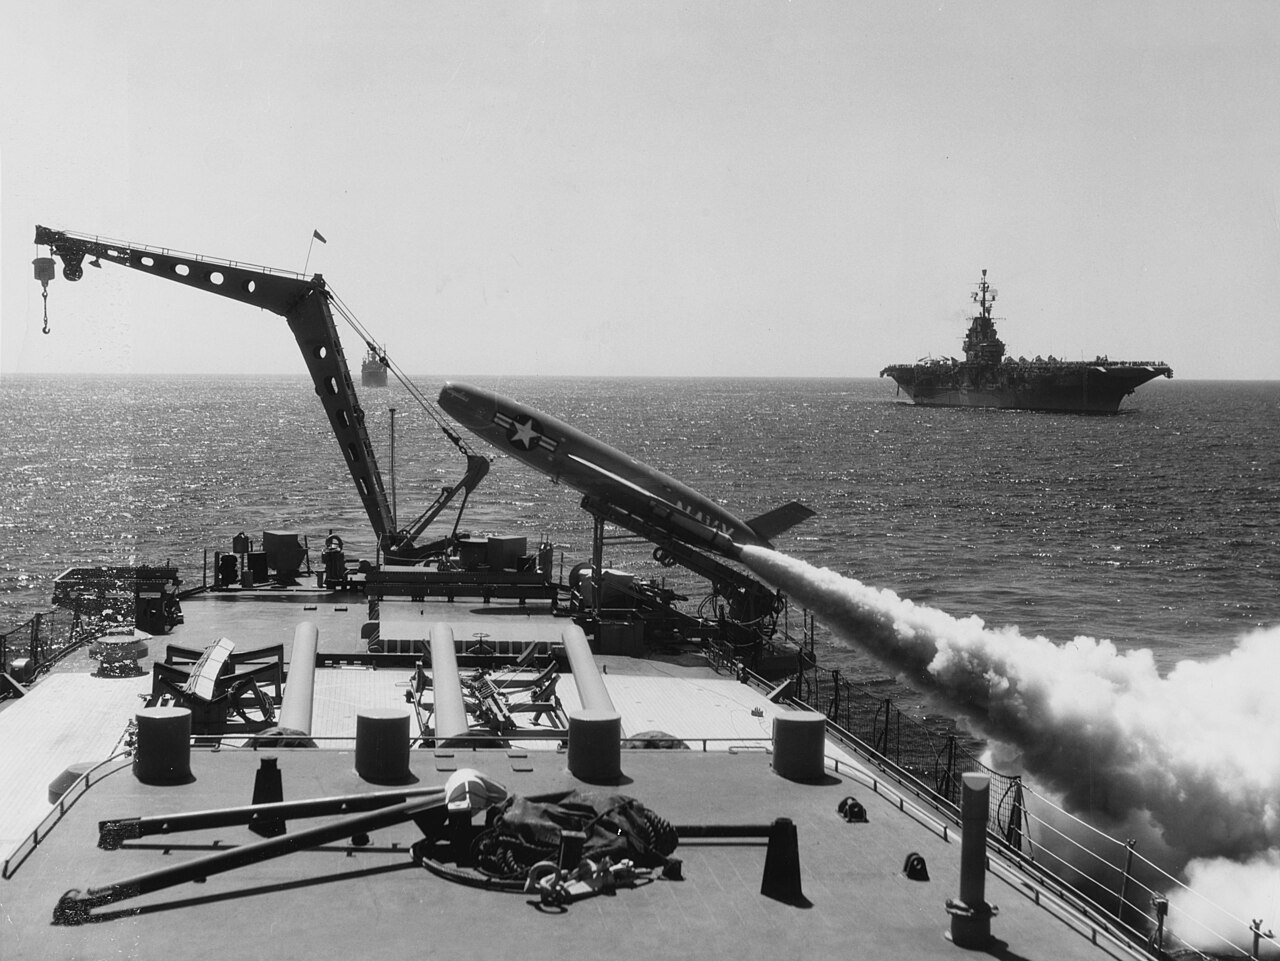 1280px-USS_Los_Angeles_%28CA-135%29_firing_a_Regulus_I_missile_on_7_August_1957_%28NH_97391%29.jpg